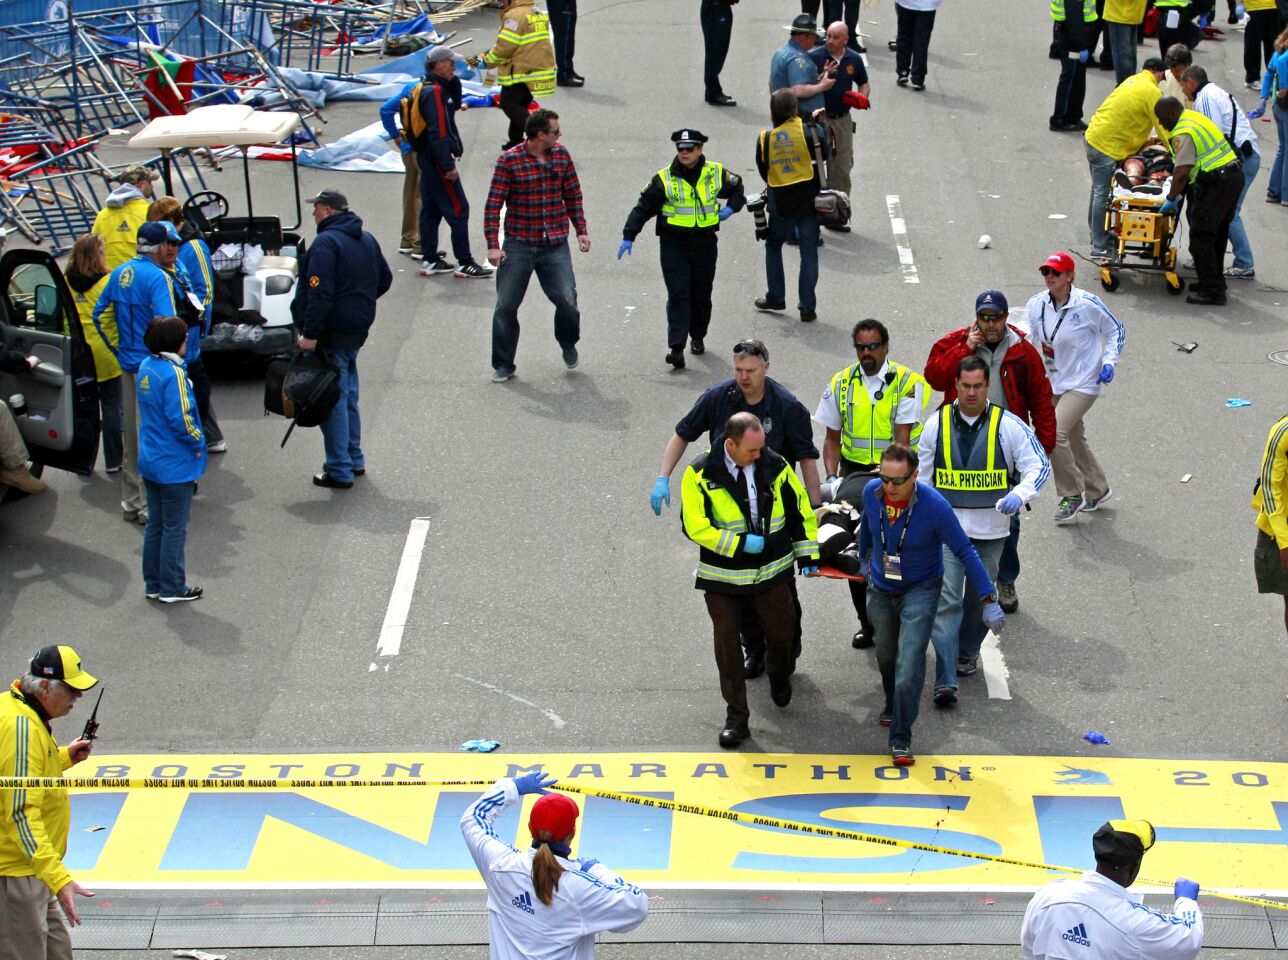 Medical workers take the injured across the finish line after explosions at the Boston Marathon.